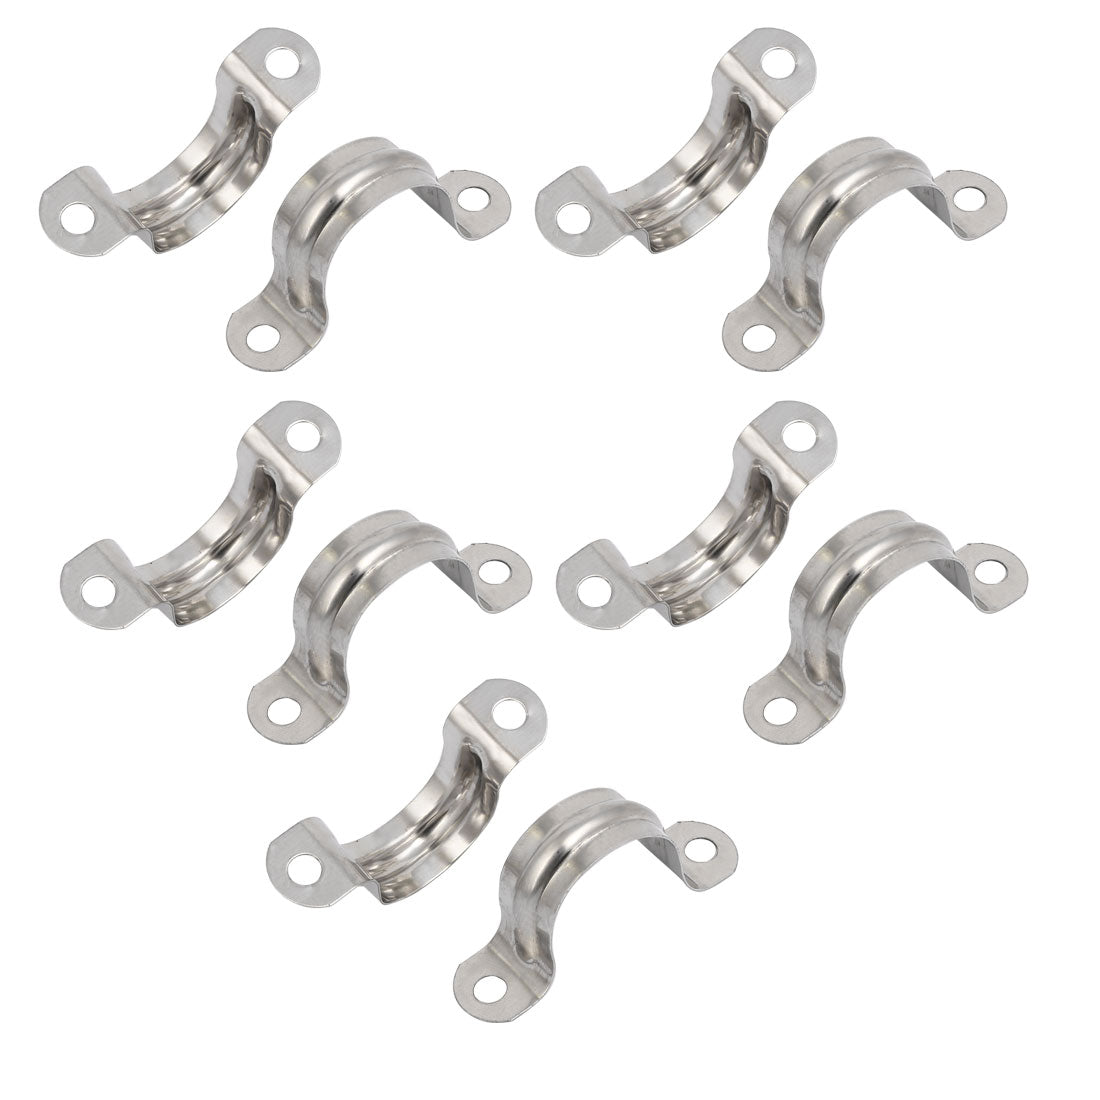 uxcell Uxcell 25mm Dia Metal U Shaped Pipe Strap Tension Tube Clips Clamps 10pcs